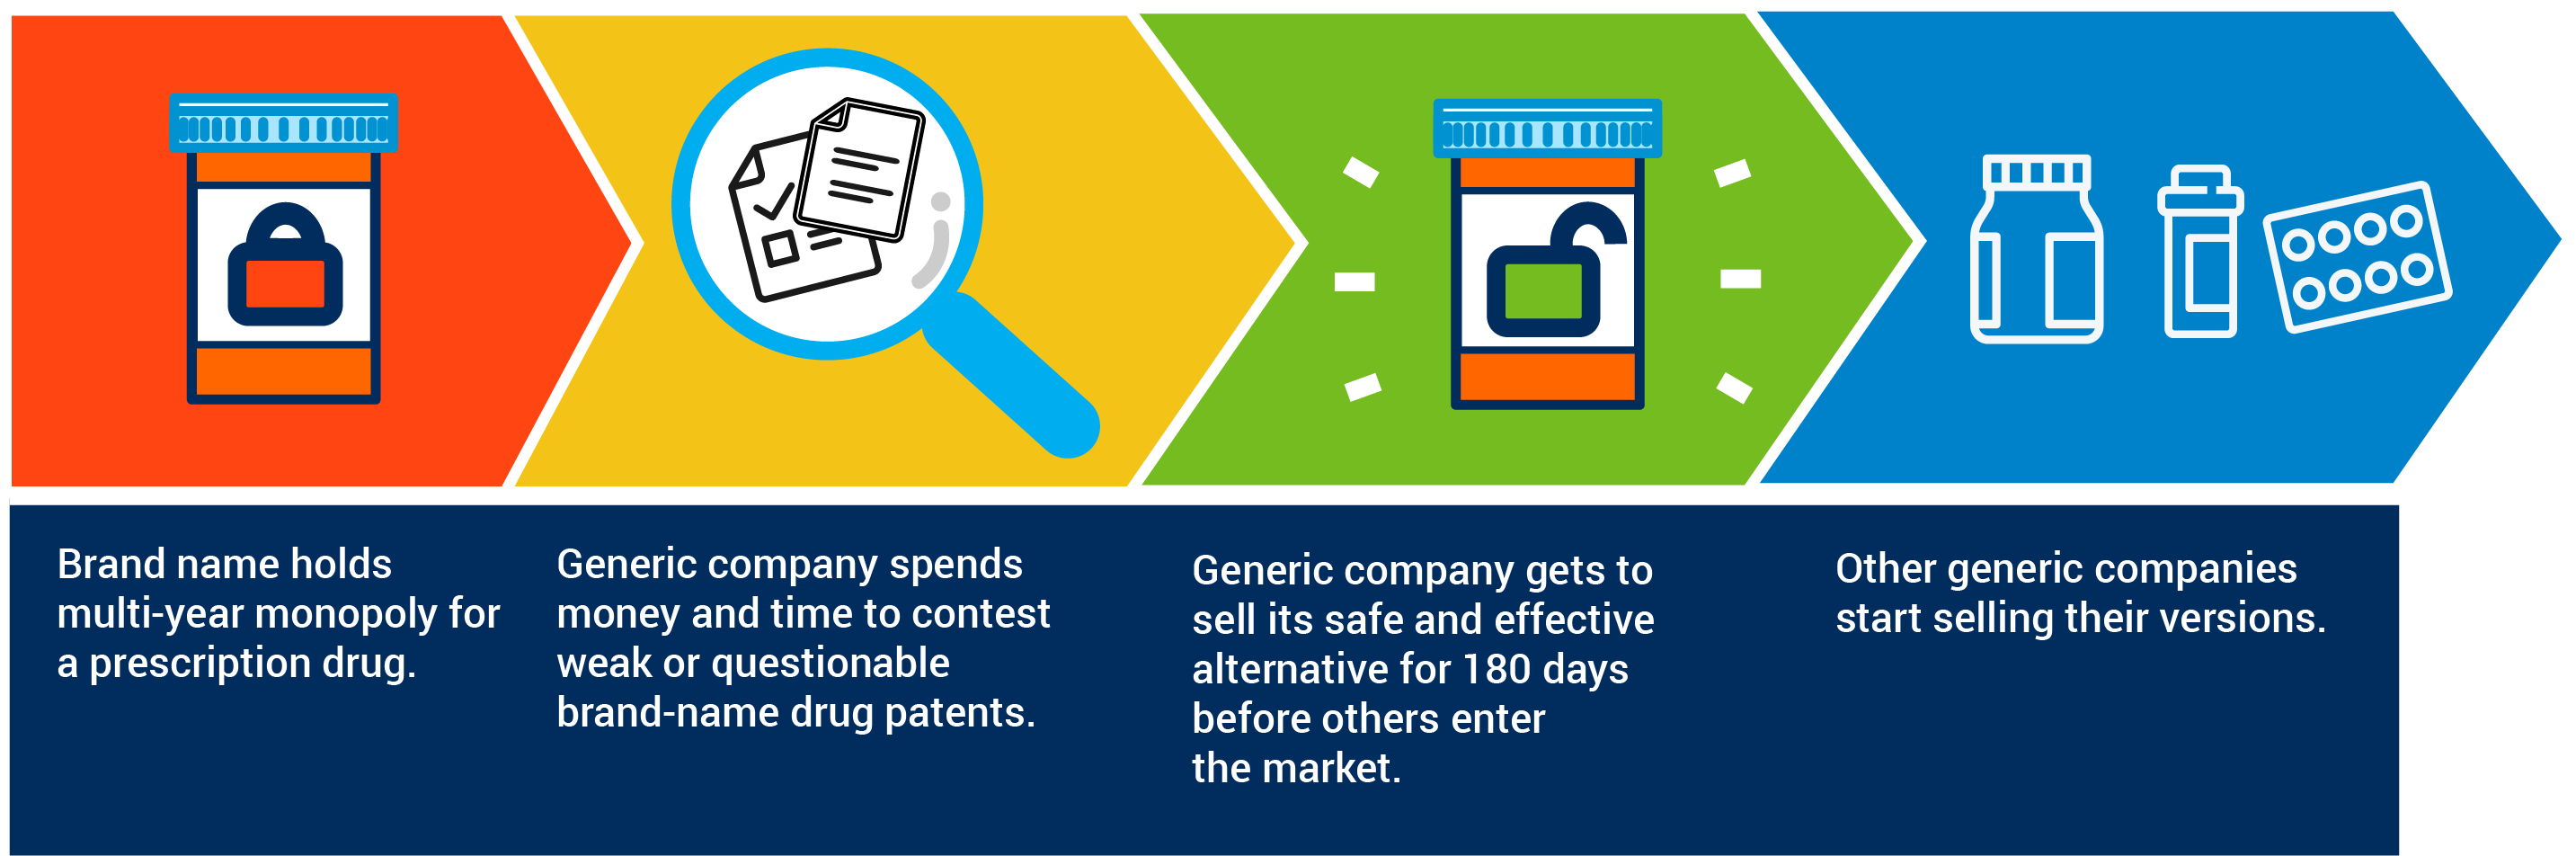 180-day period of exclusivity incentive for generic medicines